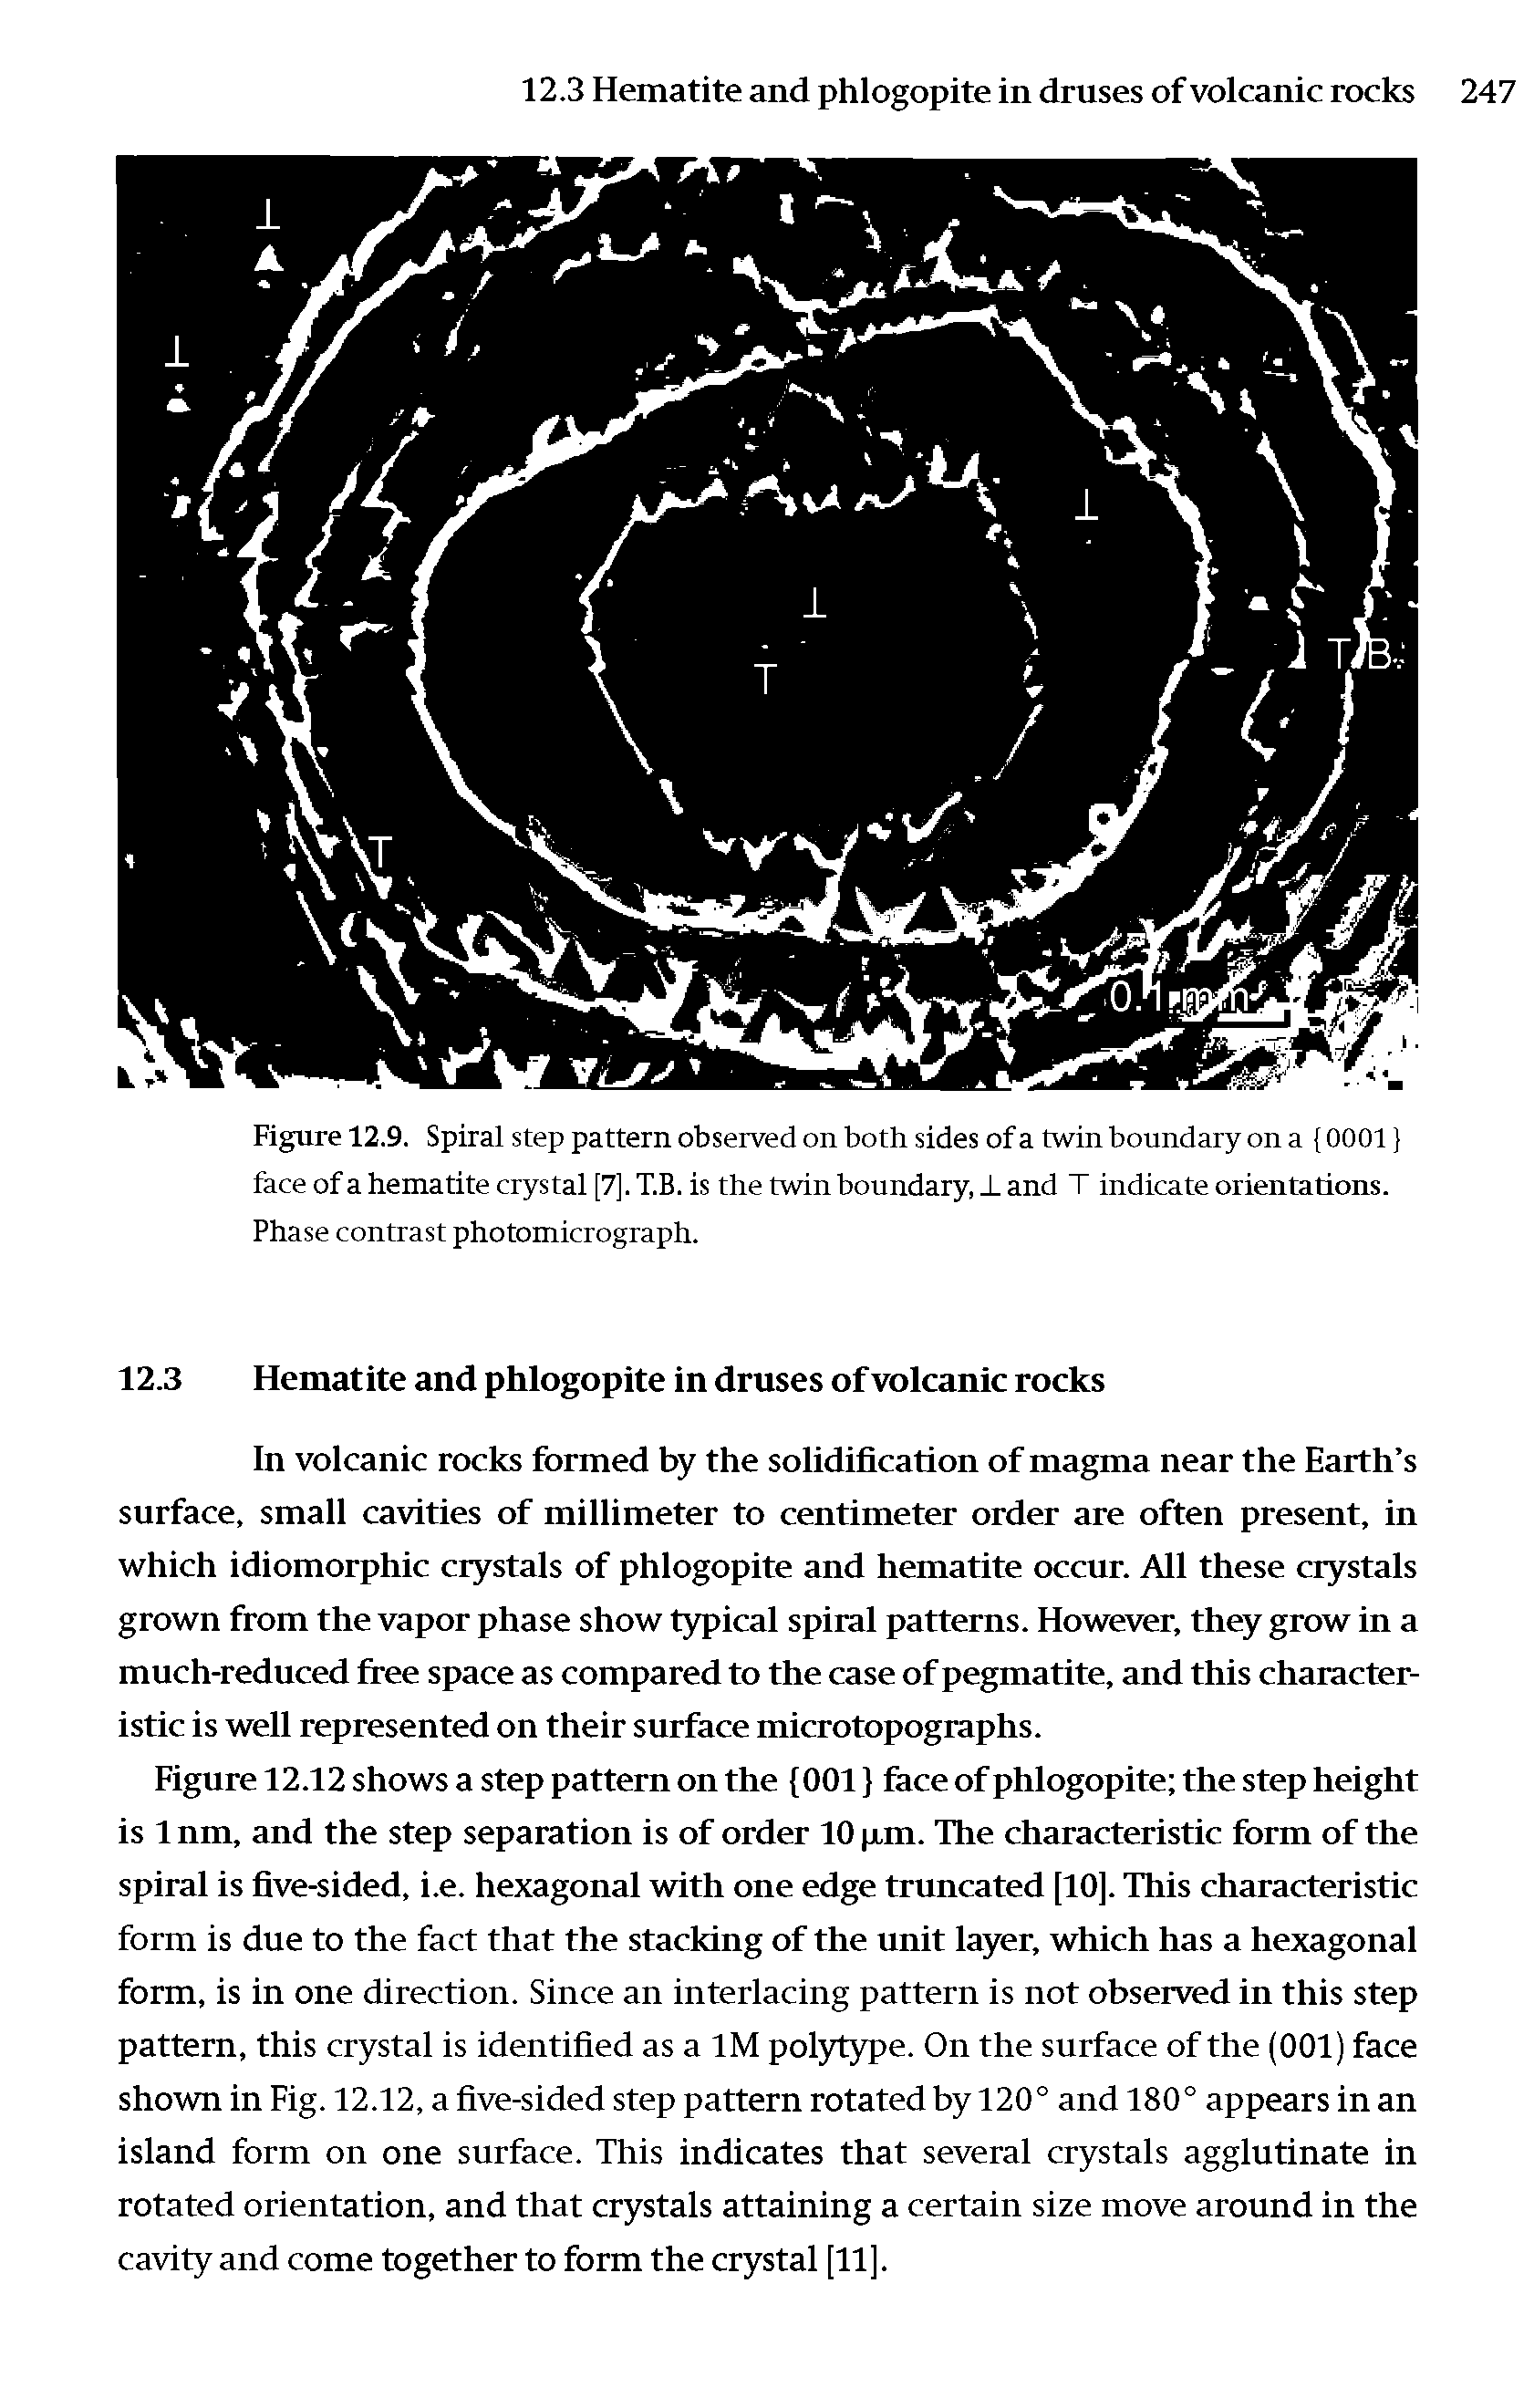 Figure 12.9. Spiral step pattern observed on both sides of a twin boundary on a 0001 face of a hematite crystal [7]. T.B. is the twin boundary, J. and T indicate orientations. Phase contrast photomicrograph.